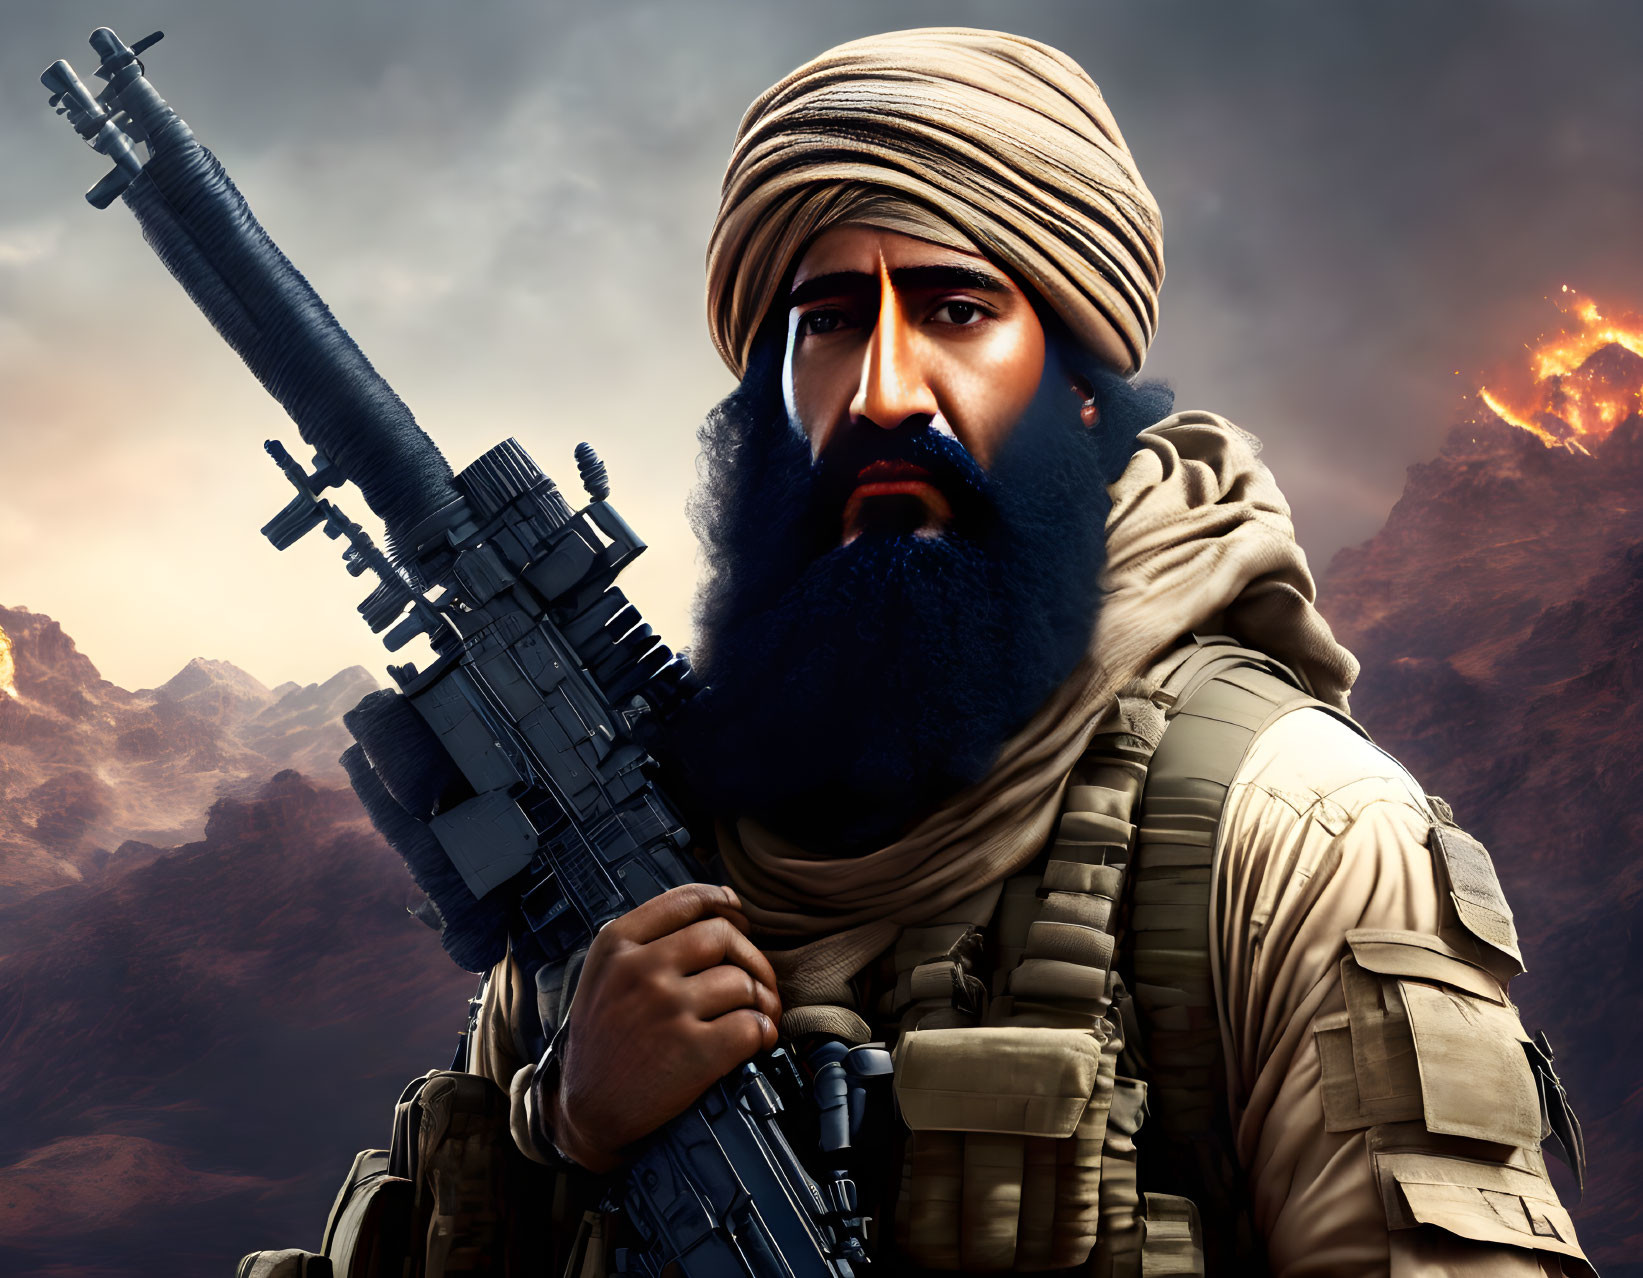 Bearded soldier in turban with rifle amidst fiery explosions and rugged mountains